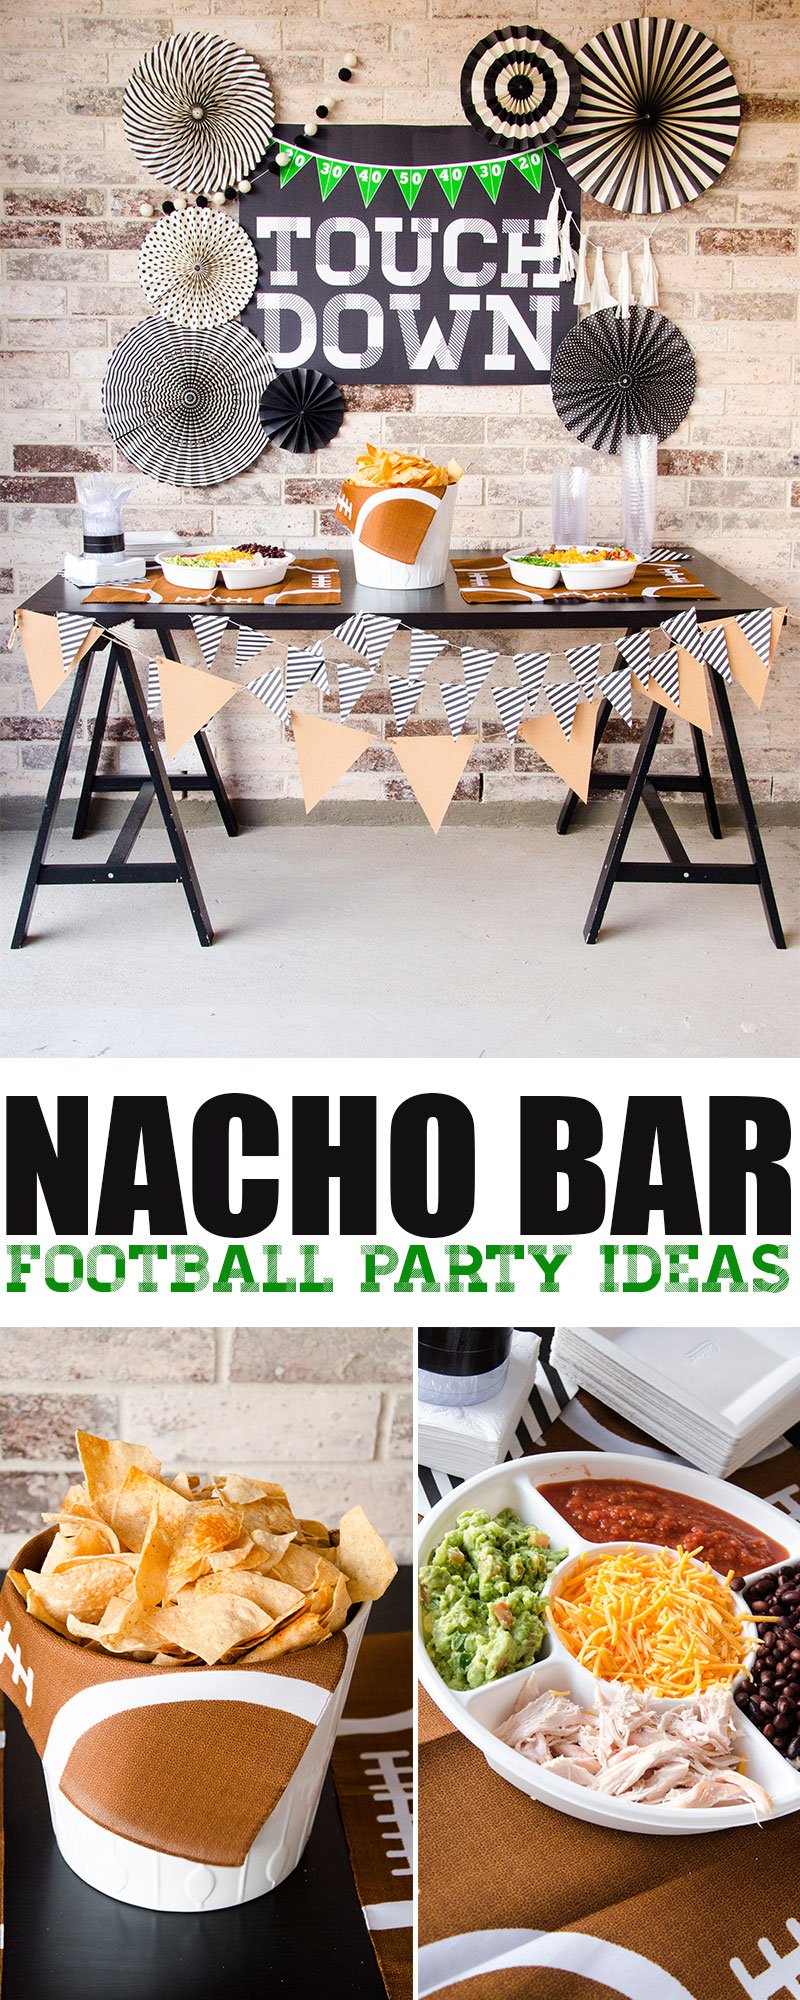 Football Game Food & Football Backdrop by Lindi Haws of Love The Day